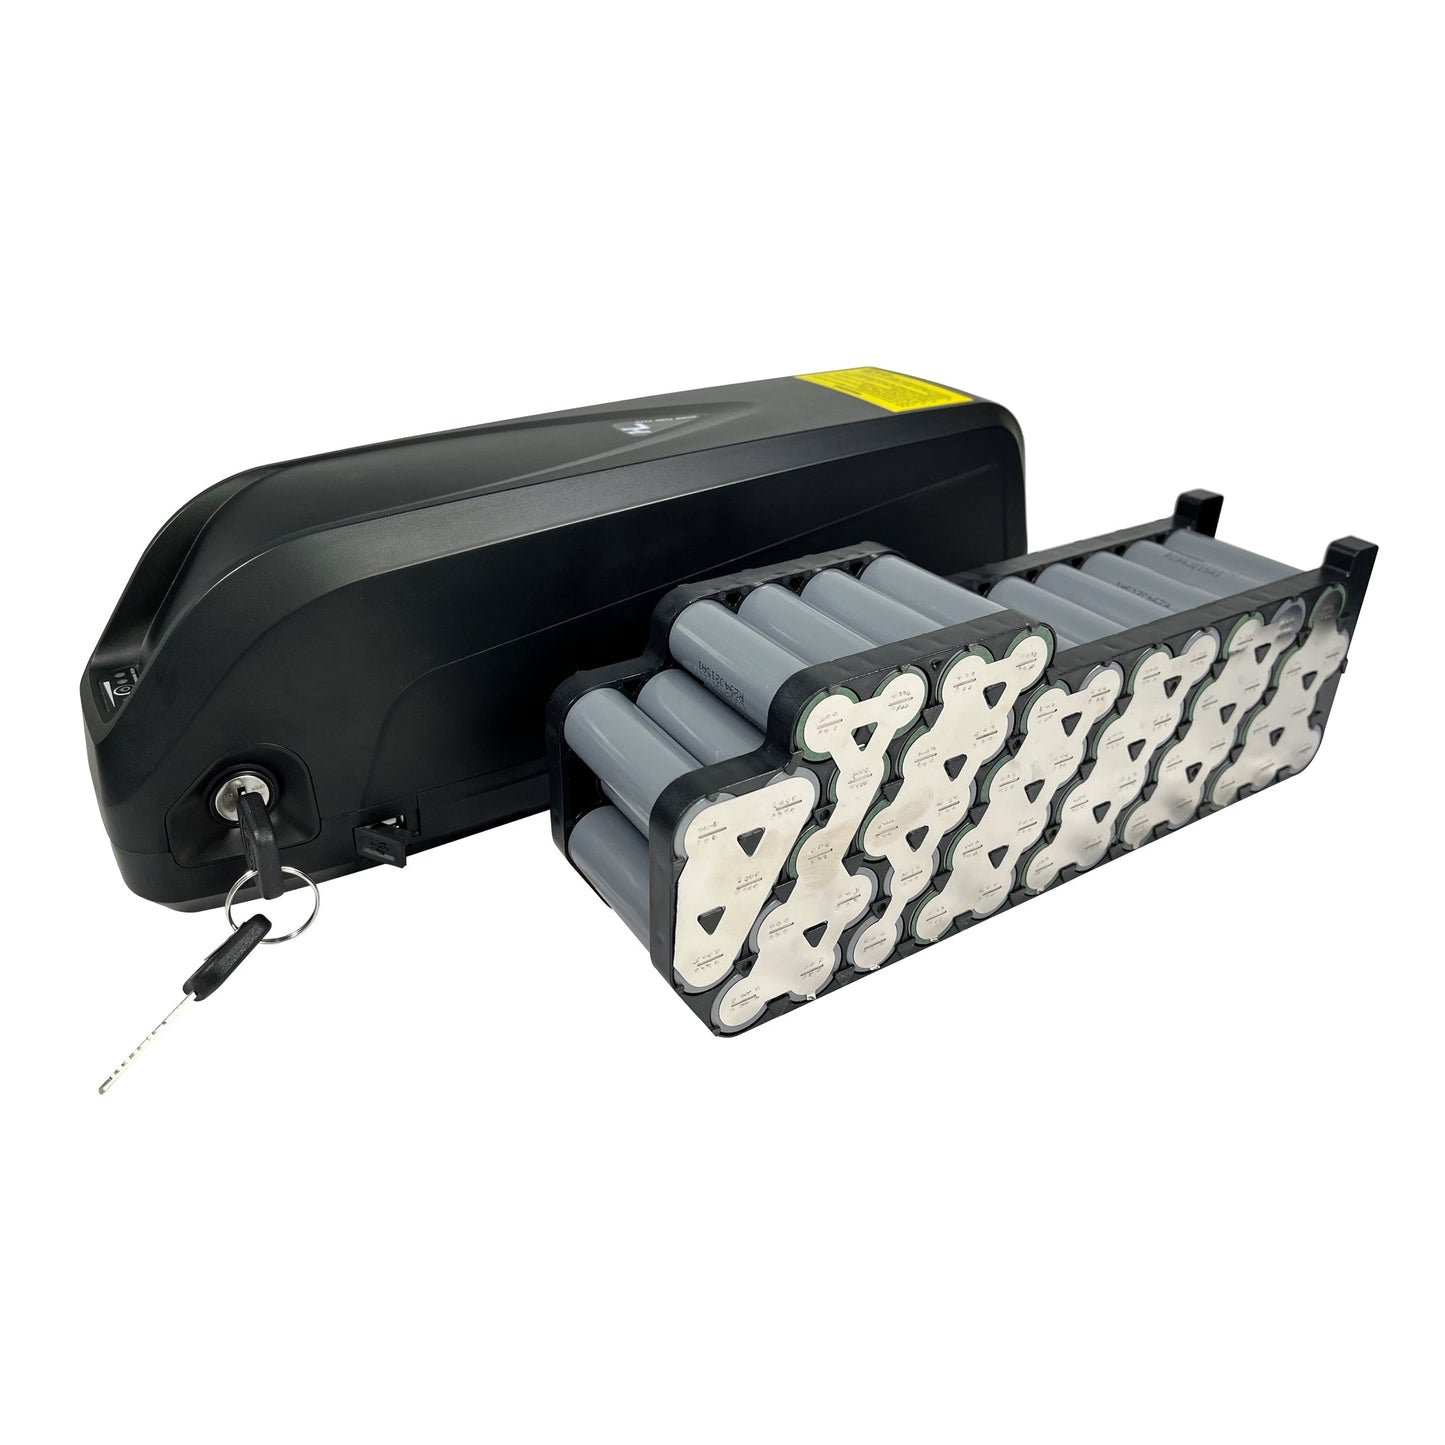 Spain Stock 48V20AH Hailong ebike battery 21700 A grade cell 40A BMS support 1800W motor included 3A charger